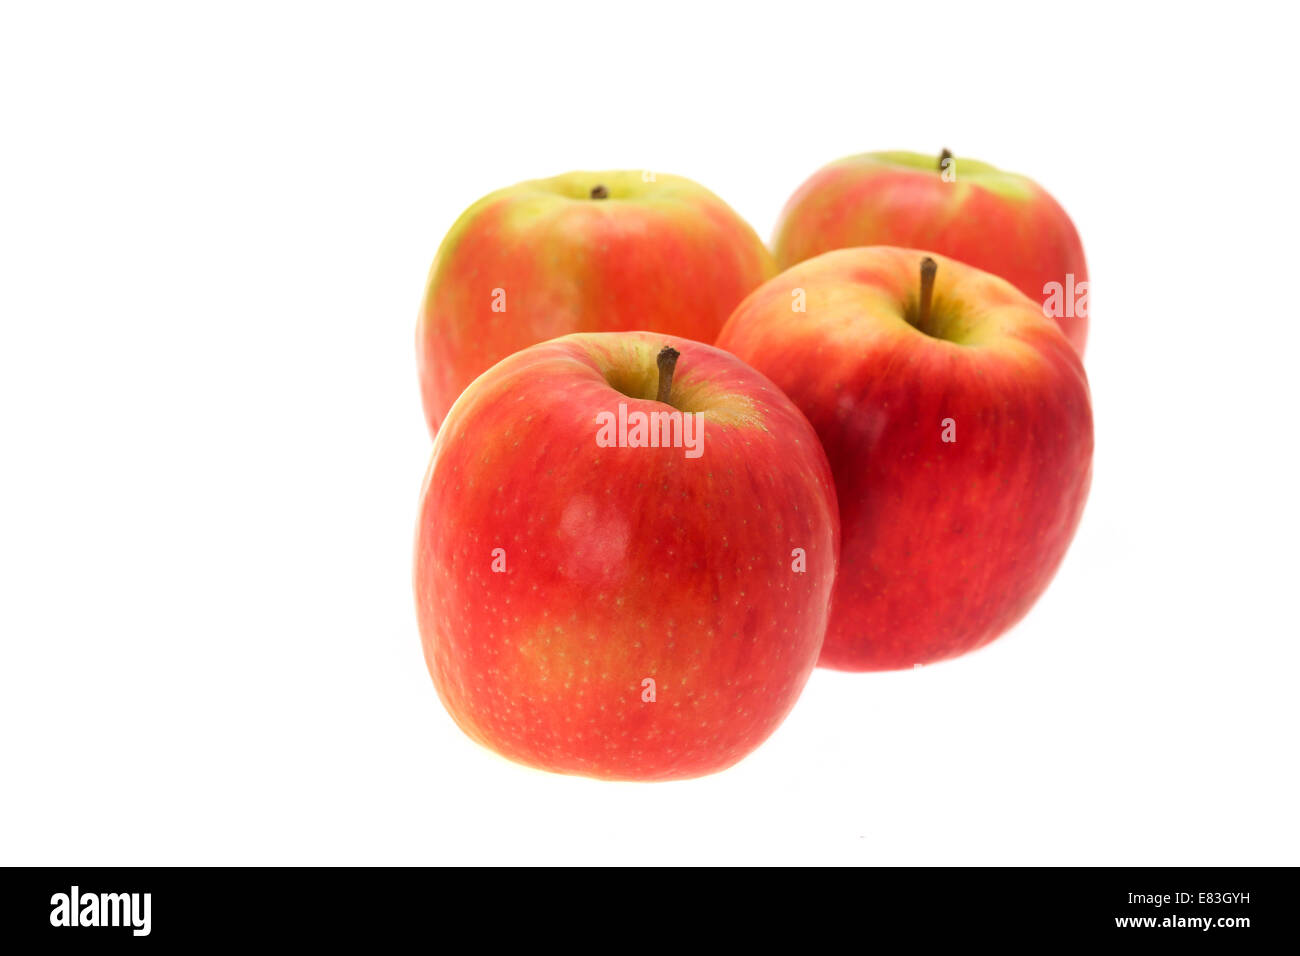 Four red apples - Pink Lady variety.  Studio shot with a white background Stock Photo